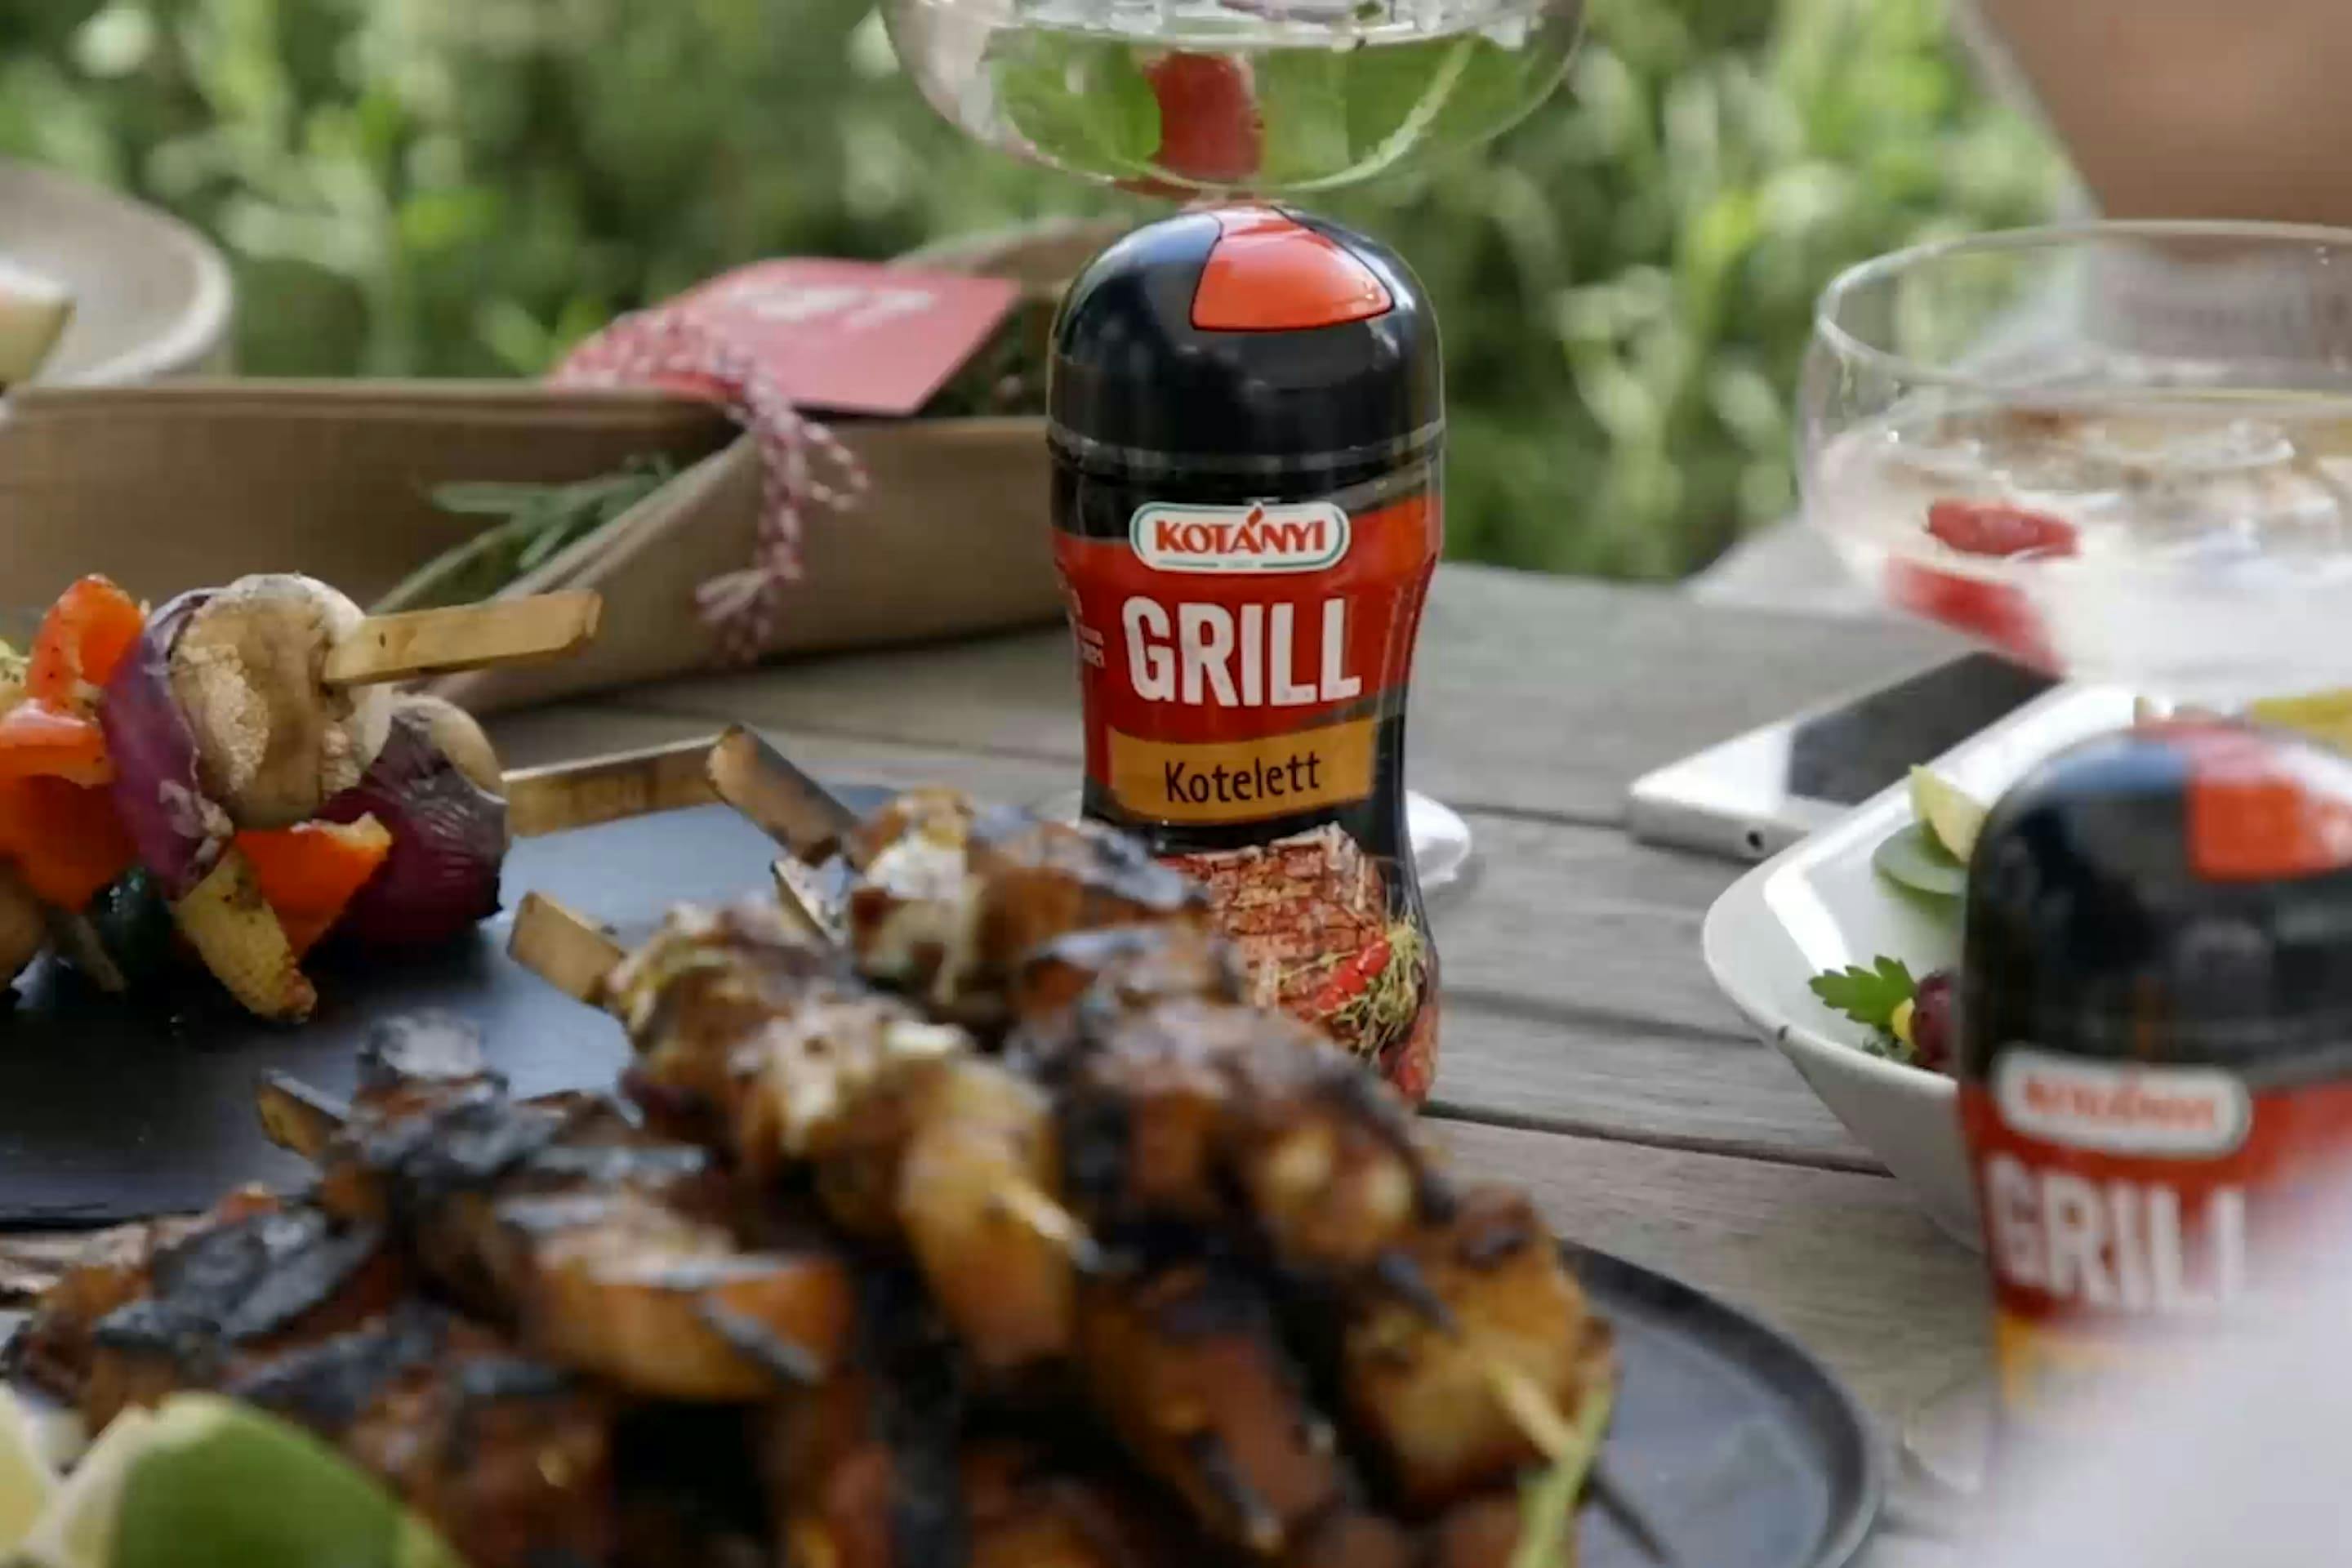 A Kotányi BBQ Shaker Can on a table with grilled food.